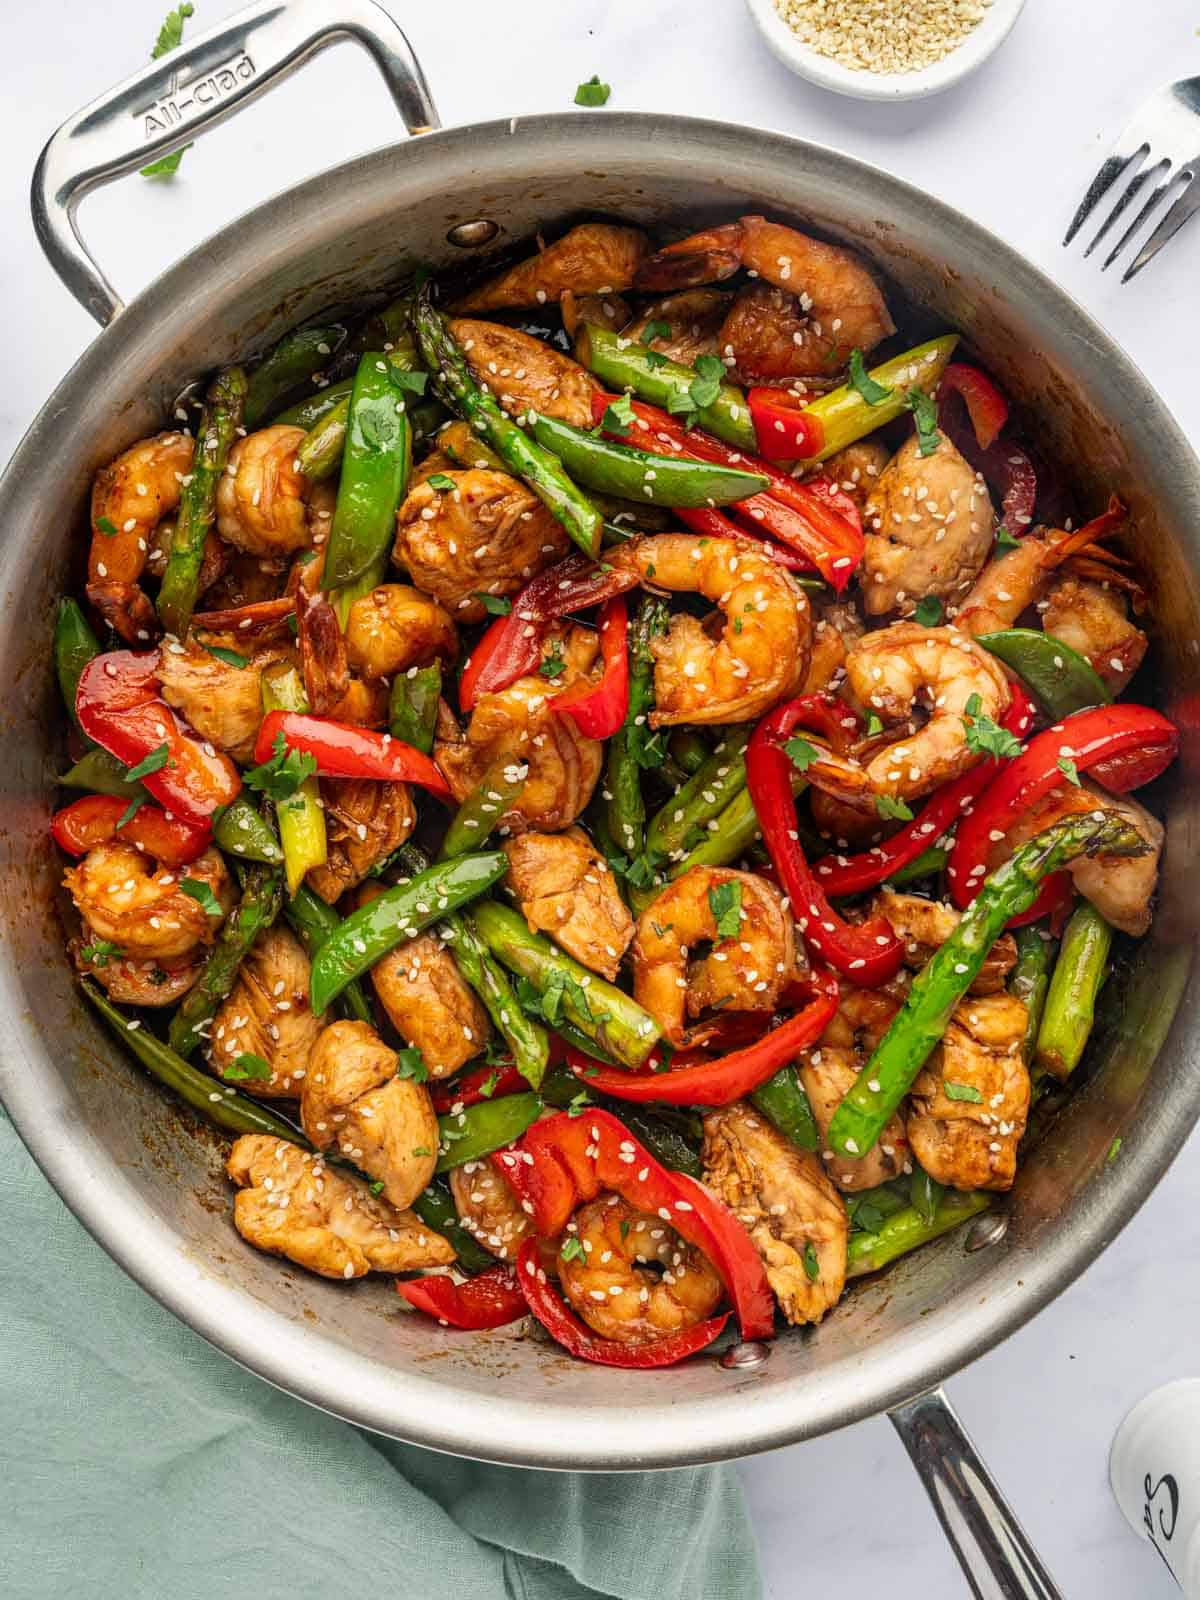 Chicken and shrimp stir fry in a pan.